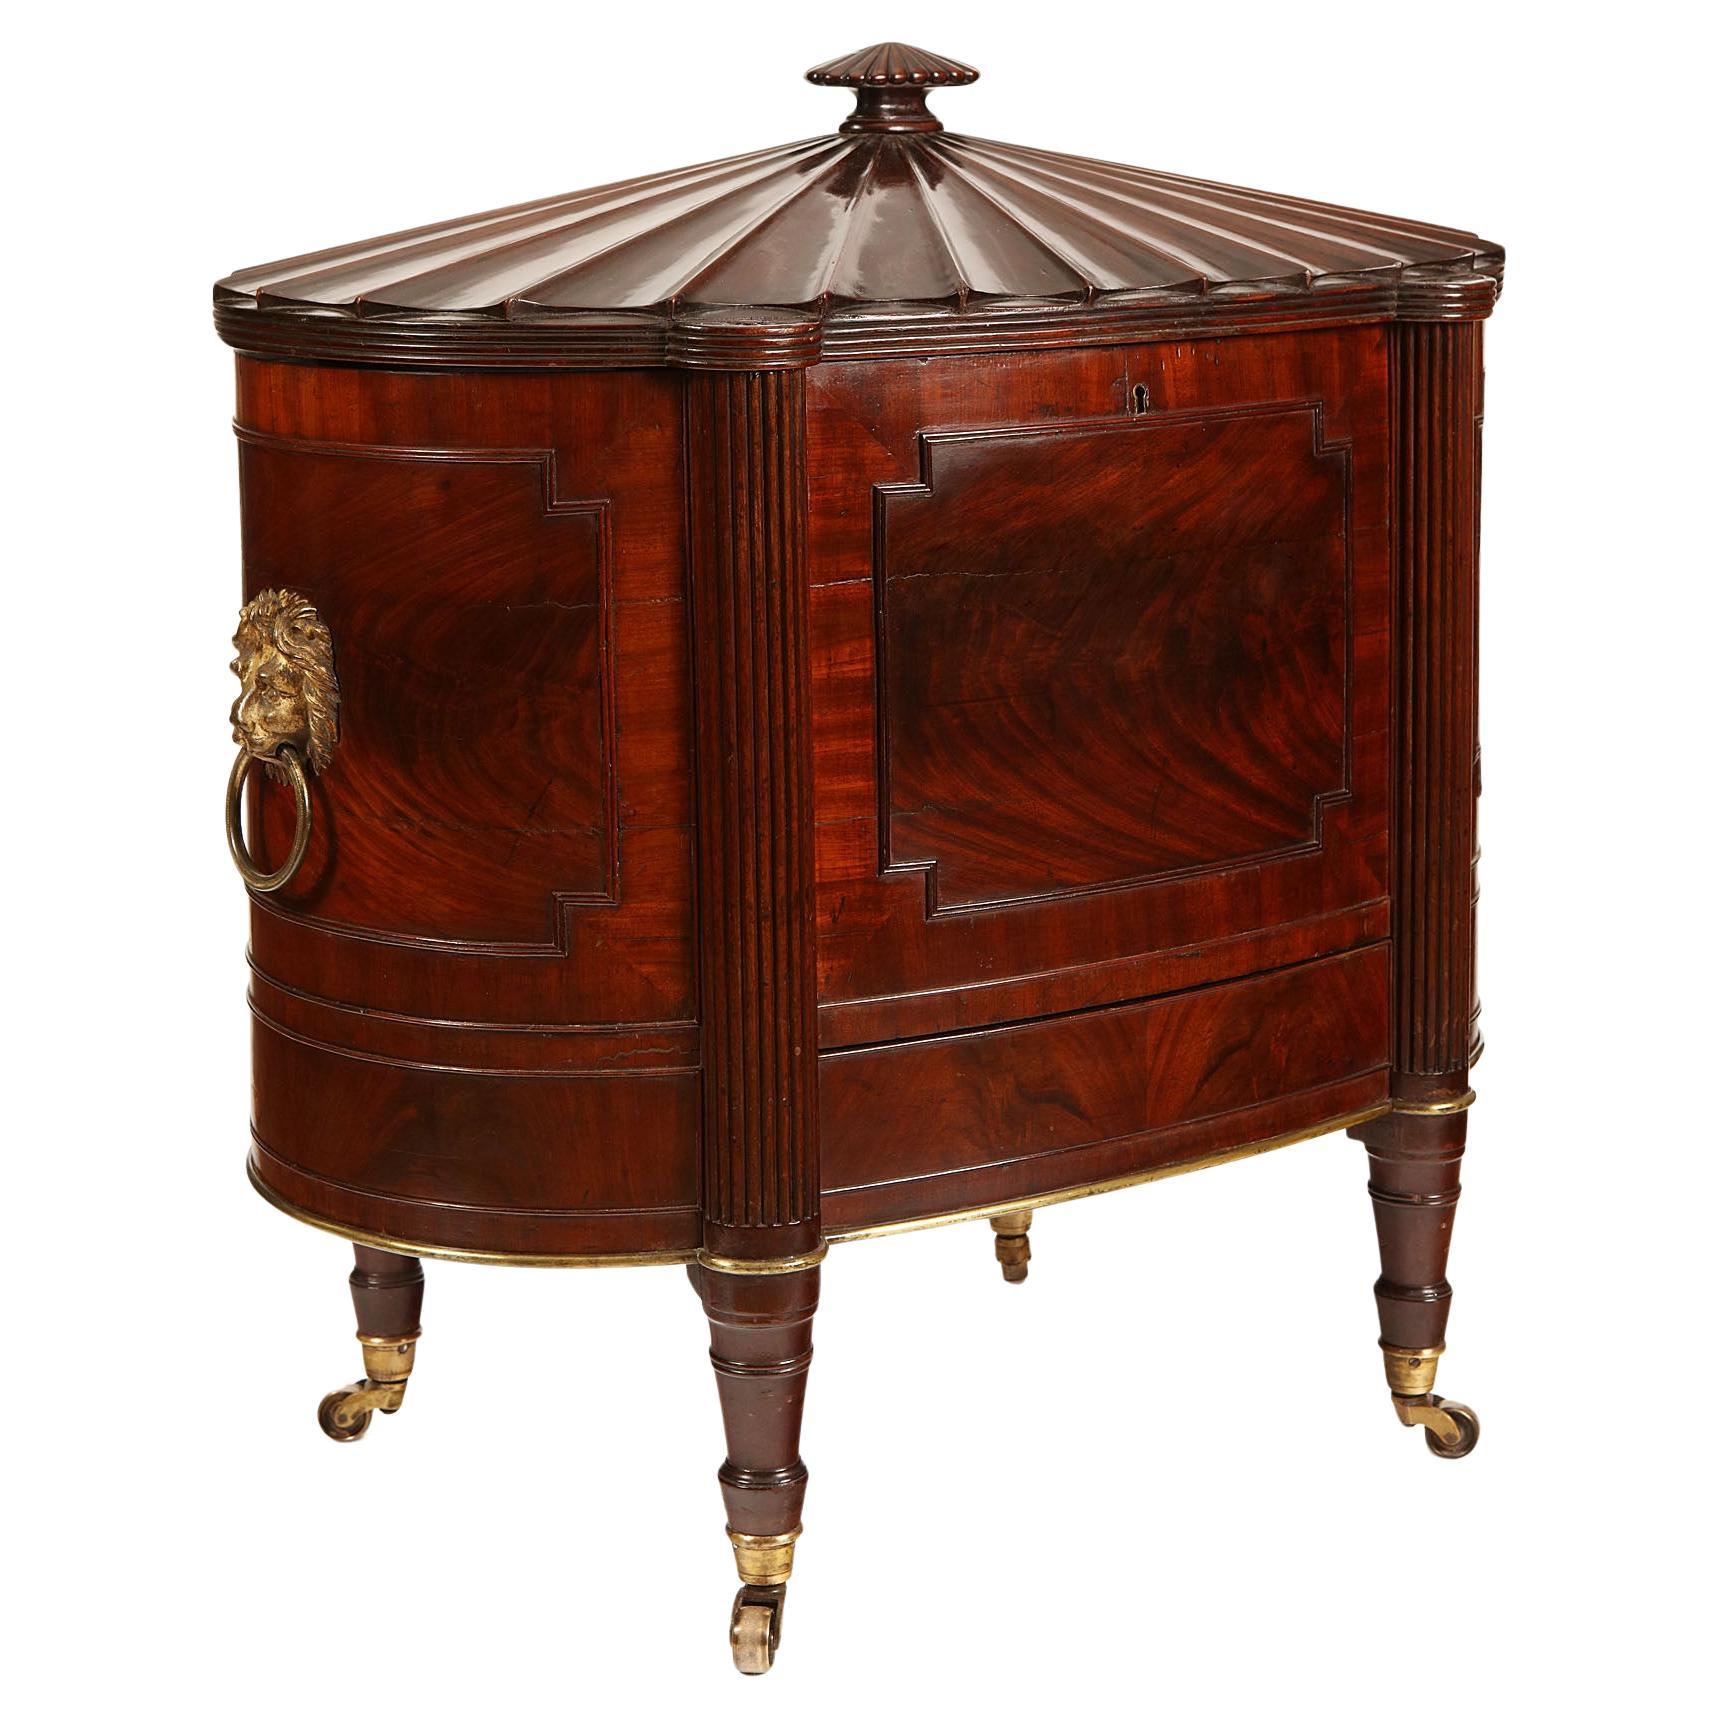 An exceptional George III mahogany cellaret, attributed to Gillows of London and For Sale